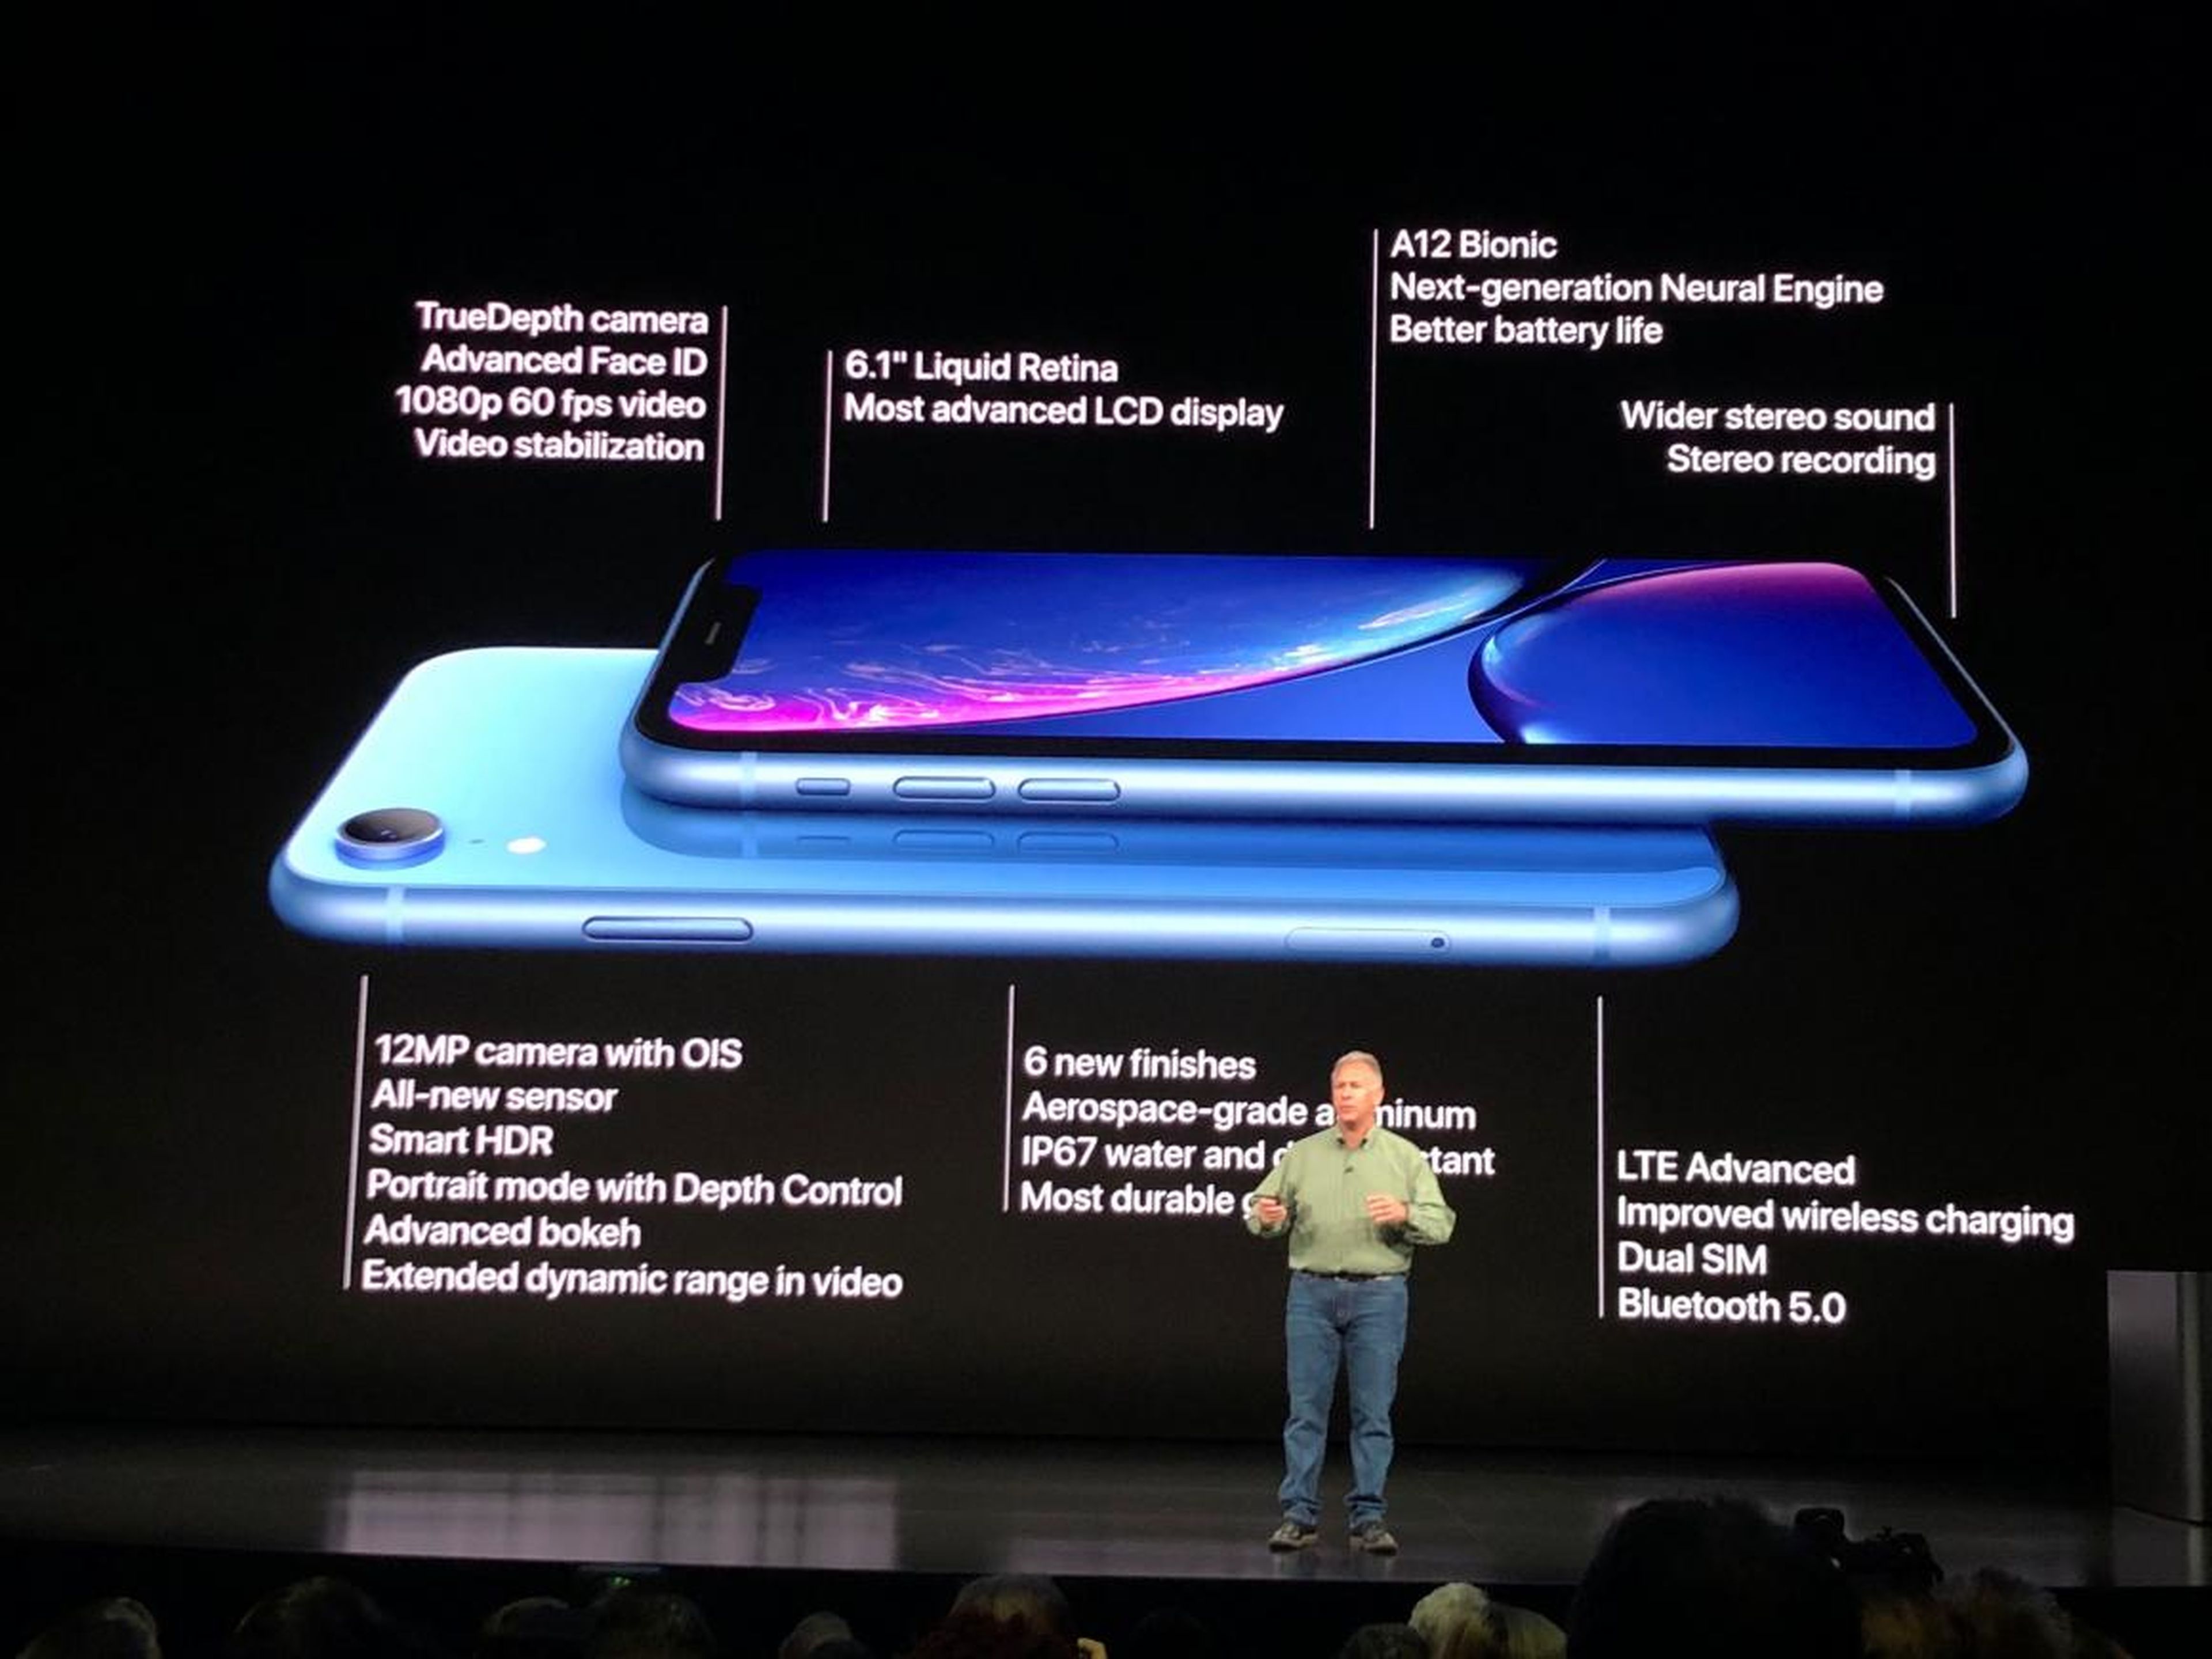 7. The iPhone XR has better battery life than the iPhone XS.